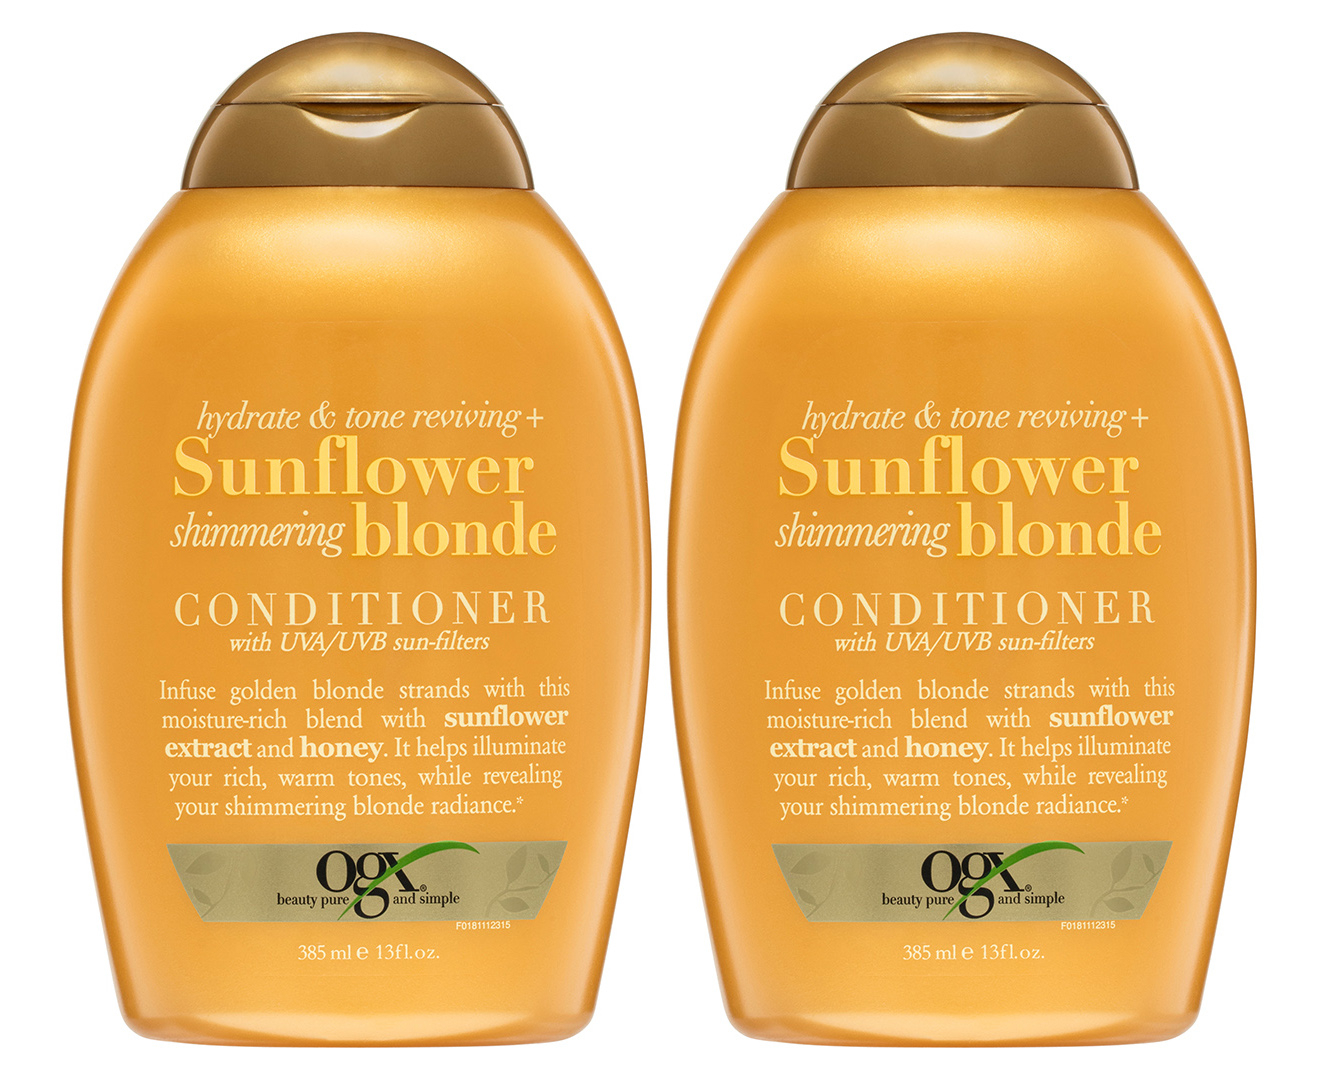 2 X Ogx Hydrate And Tone Reviving Sunflower Shimmering Blonde Conditioner 385ml Nz